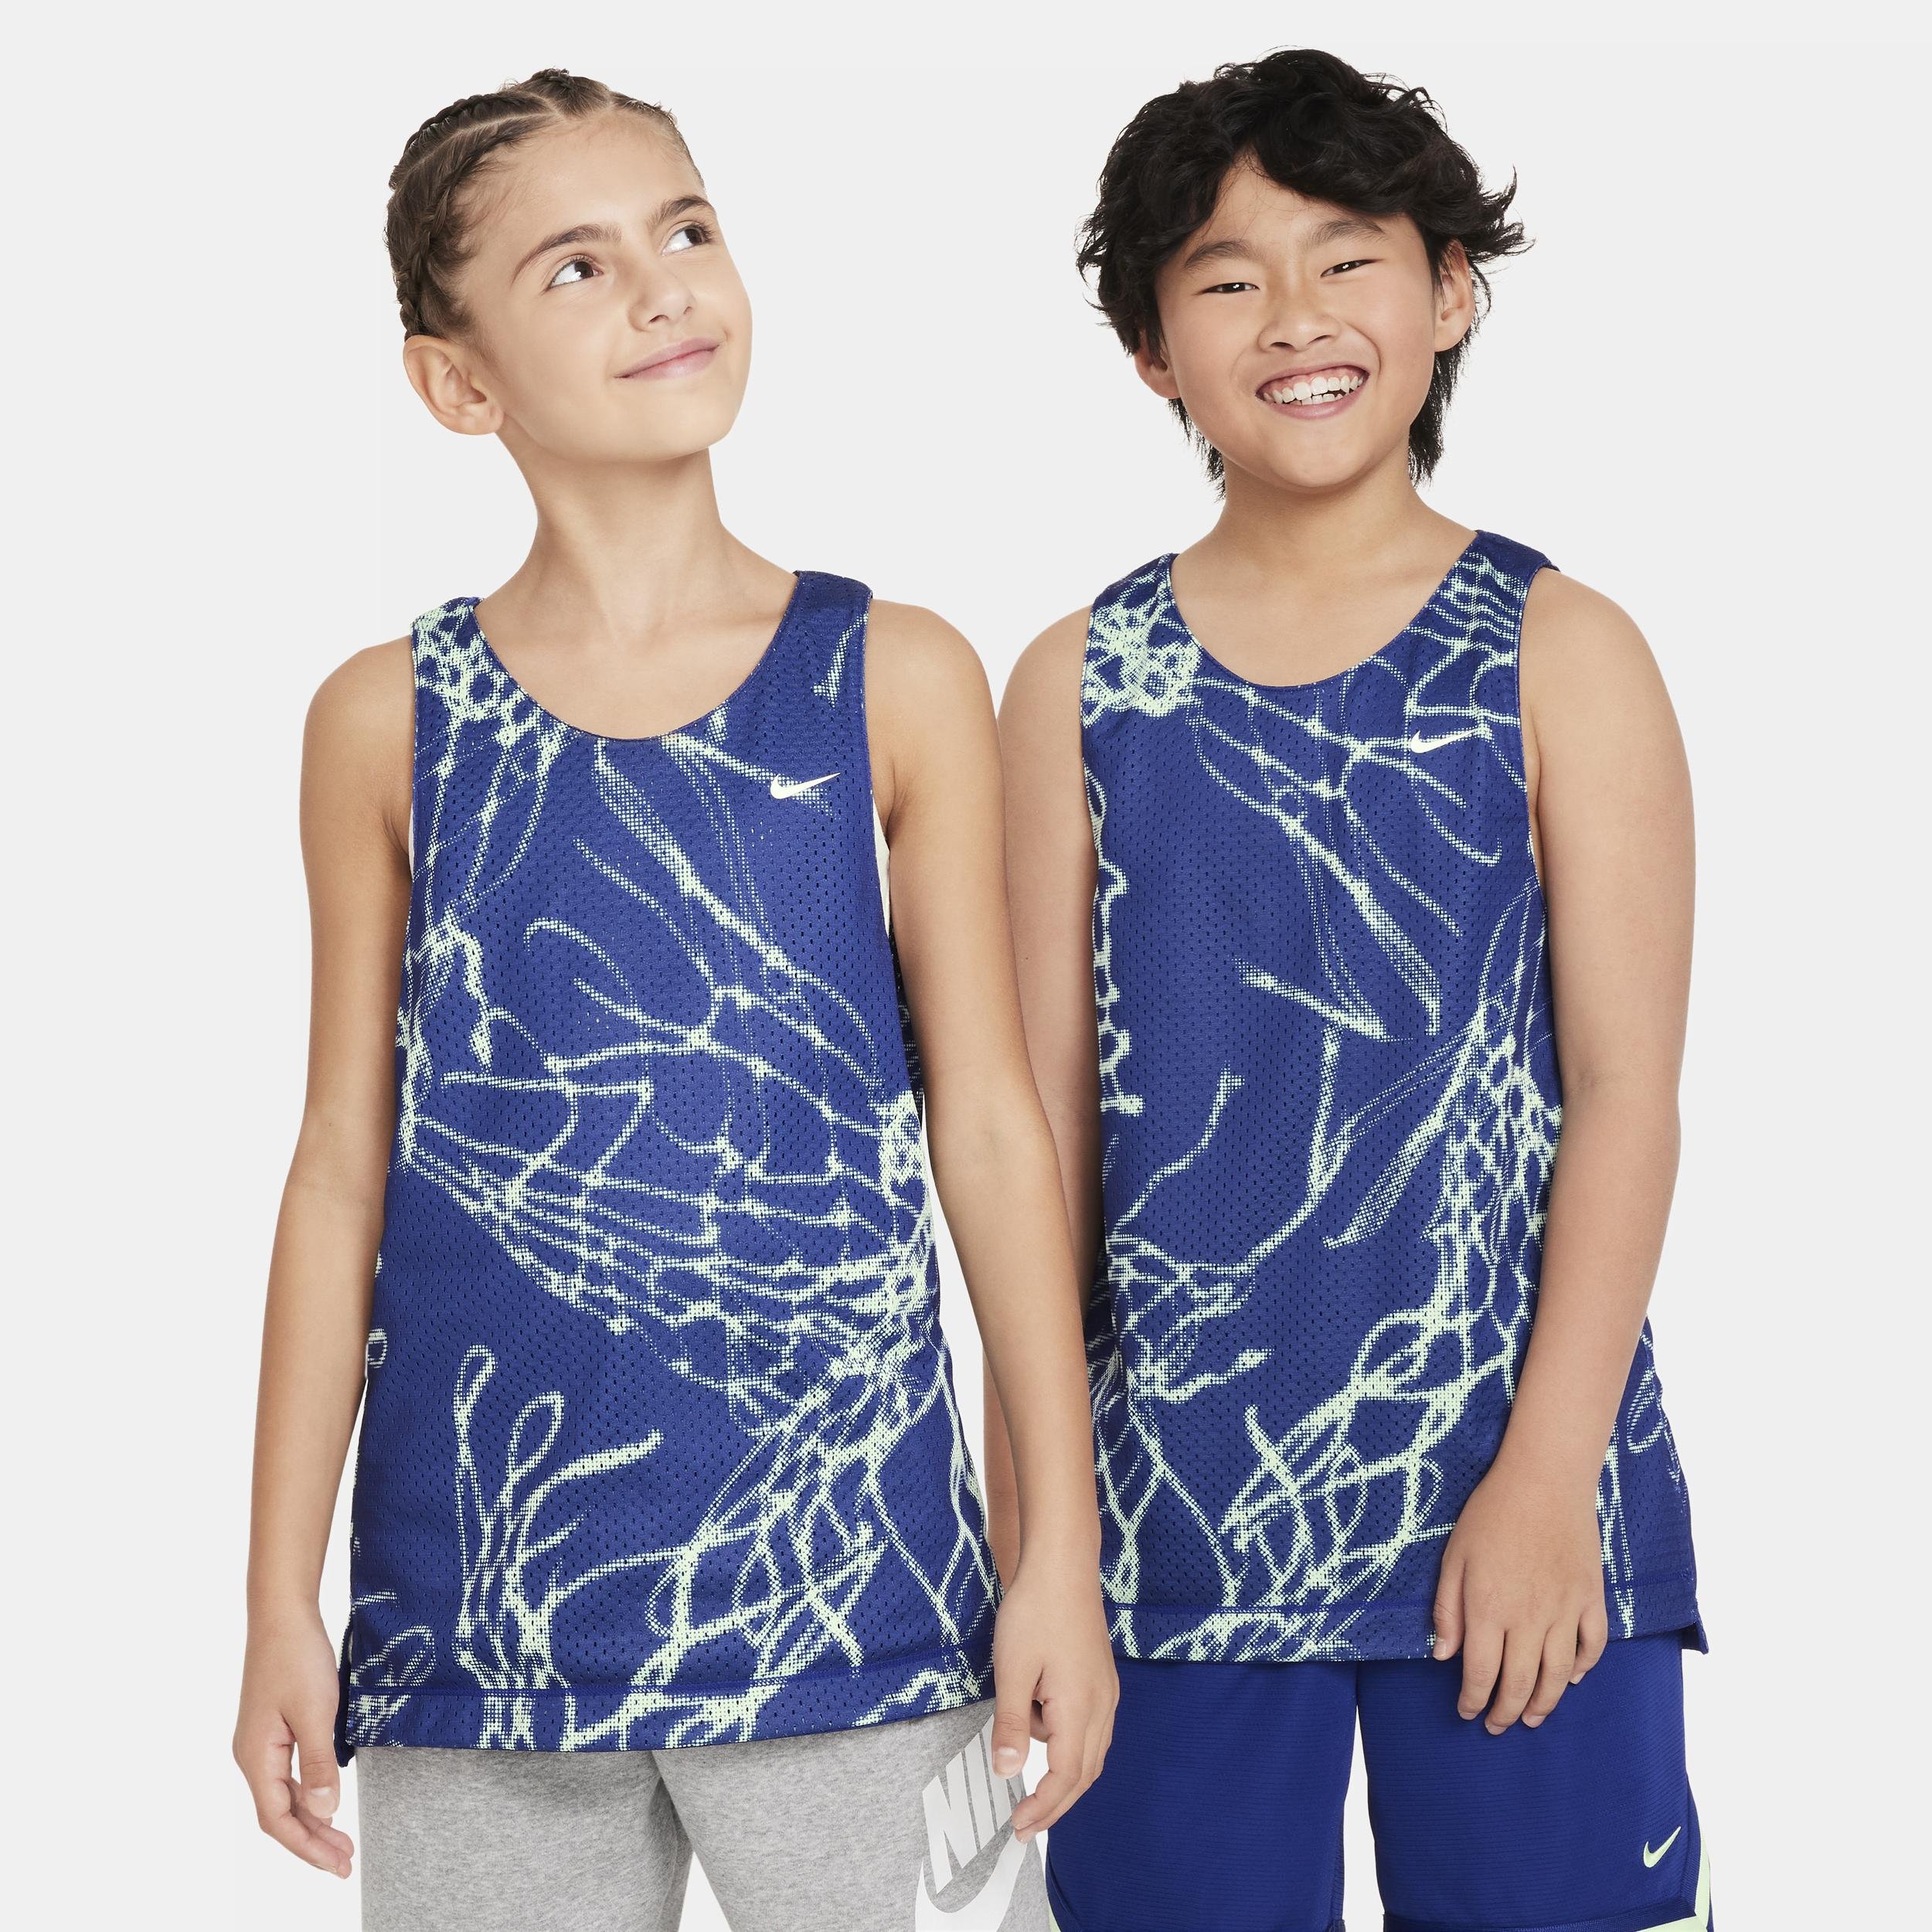 Nike Culture of Basketball Big Kids' Reversible Jersey by NIKE